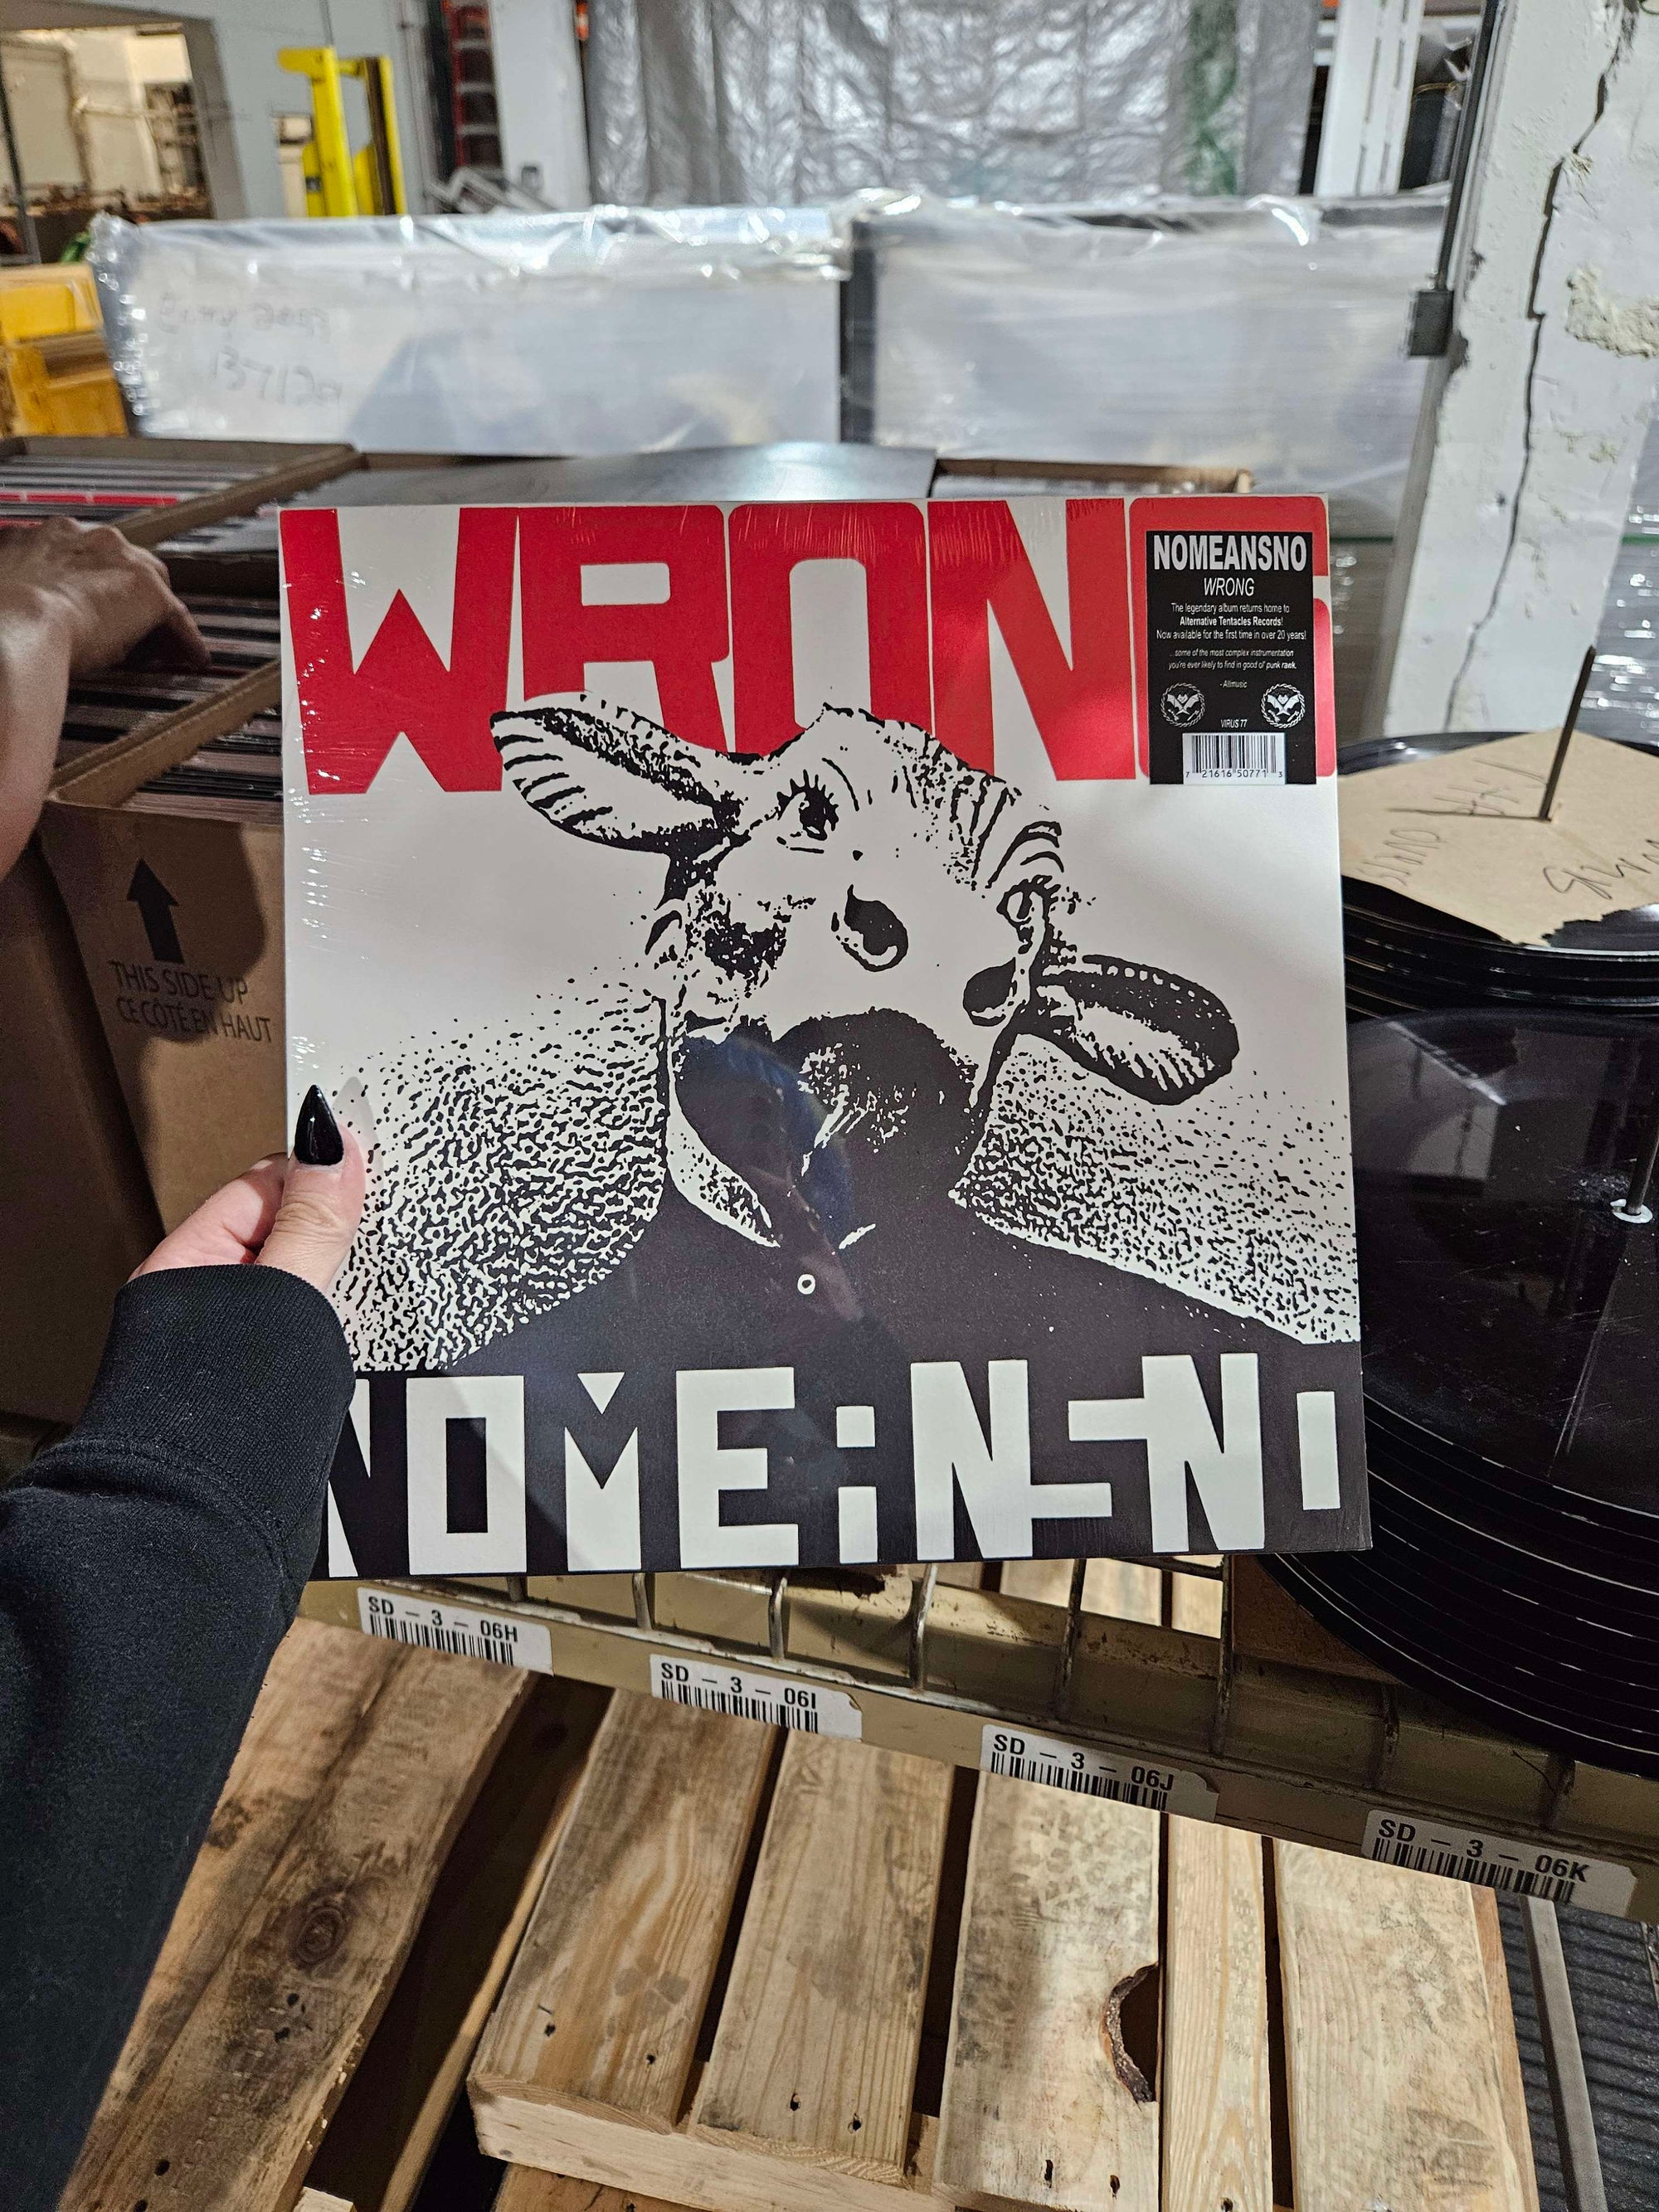 BEHIND THE SCENES: PRESSING NOMEANSNO "WRONG"